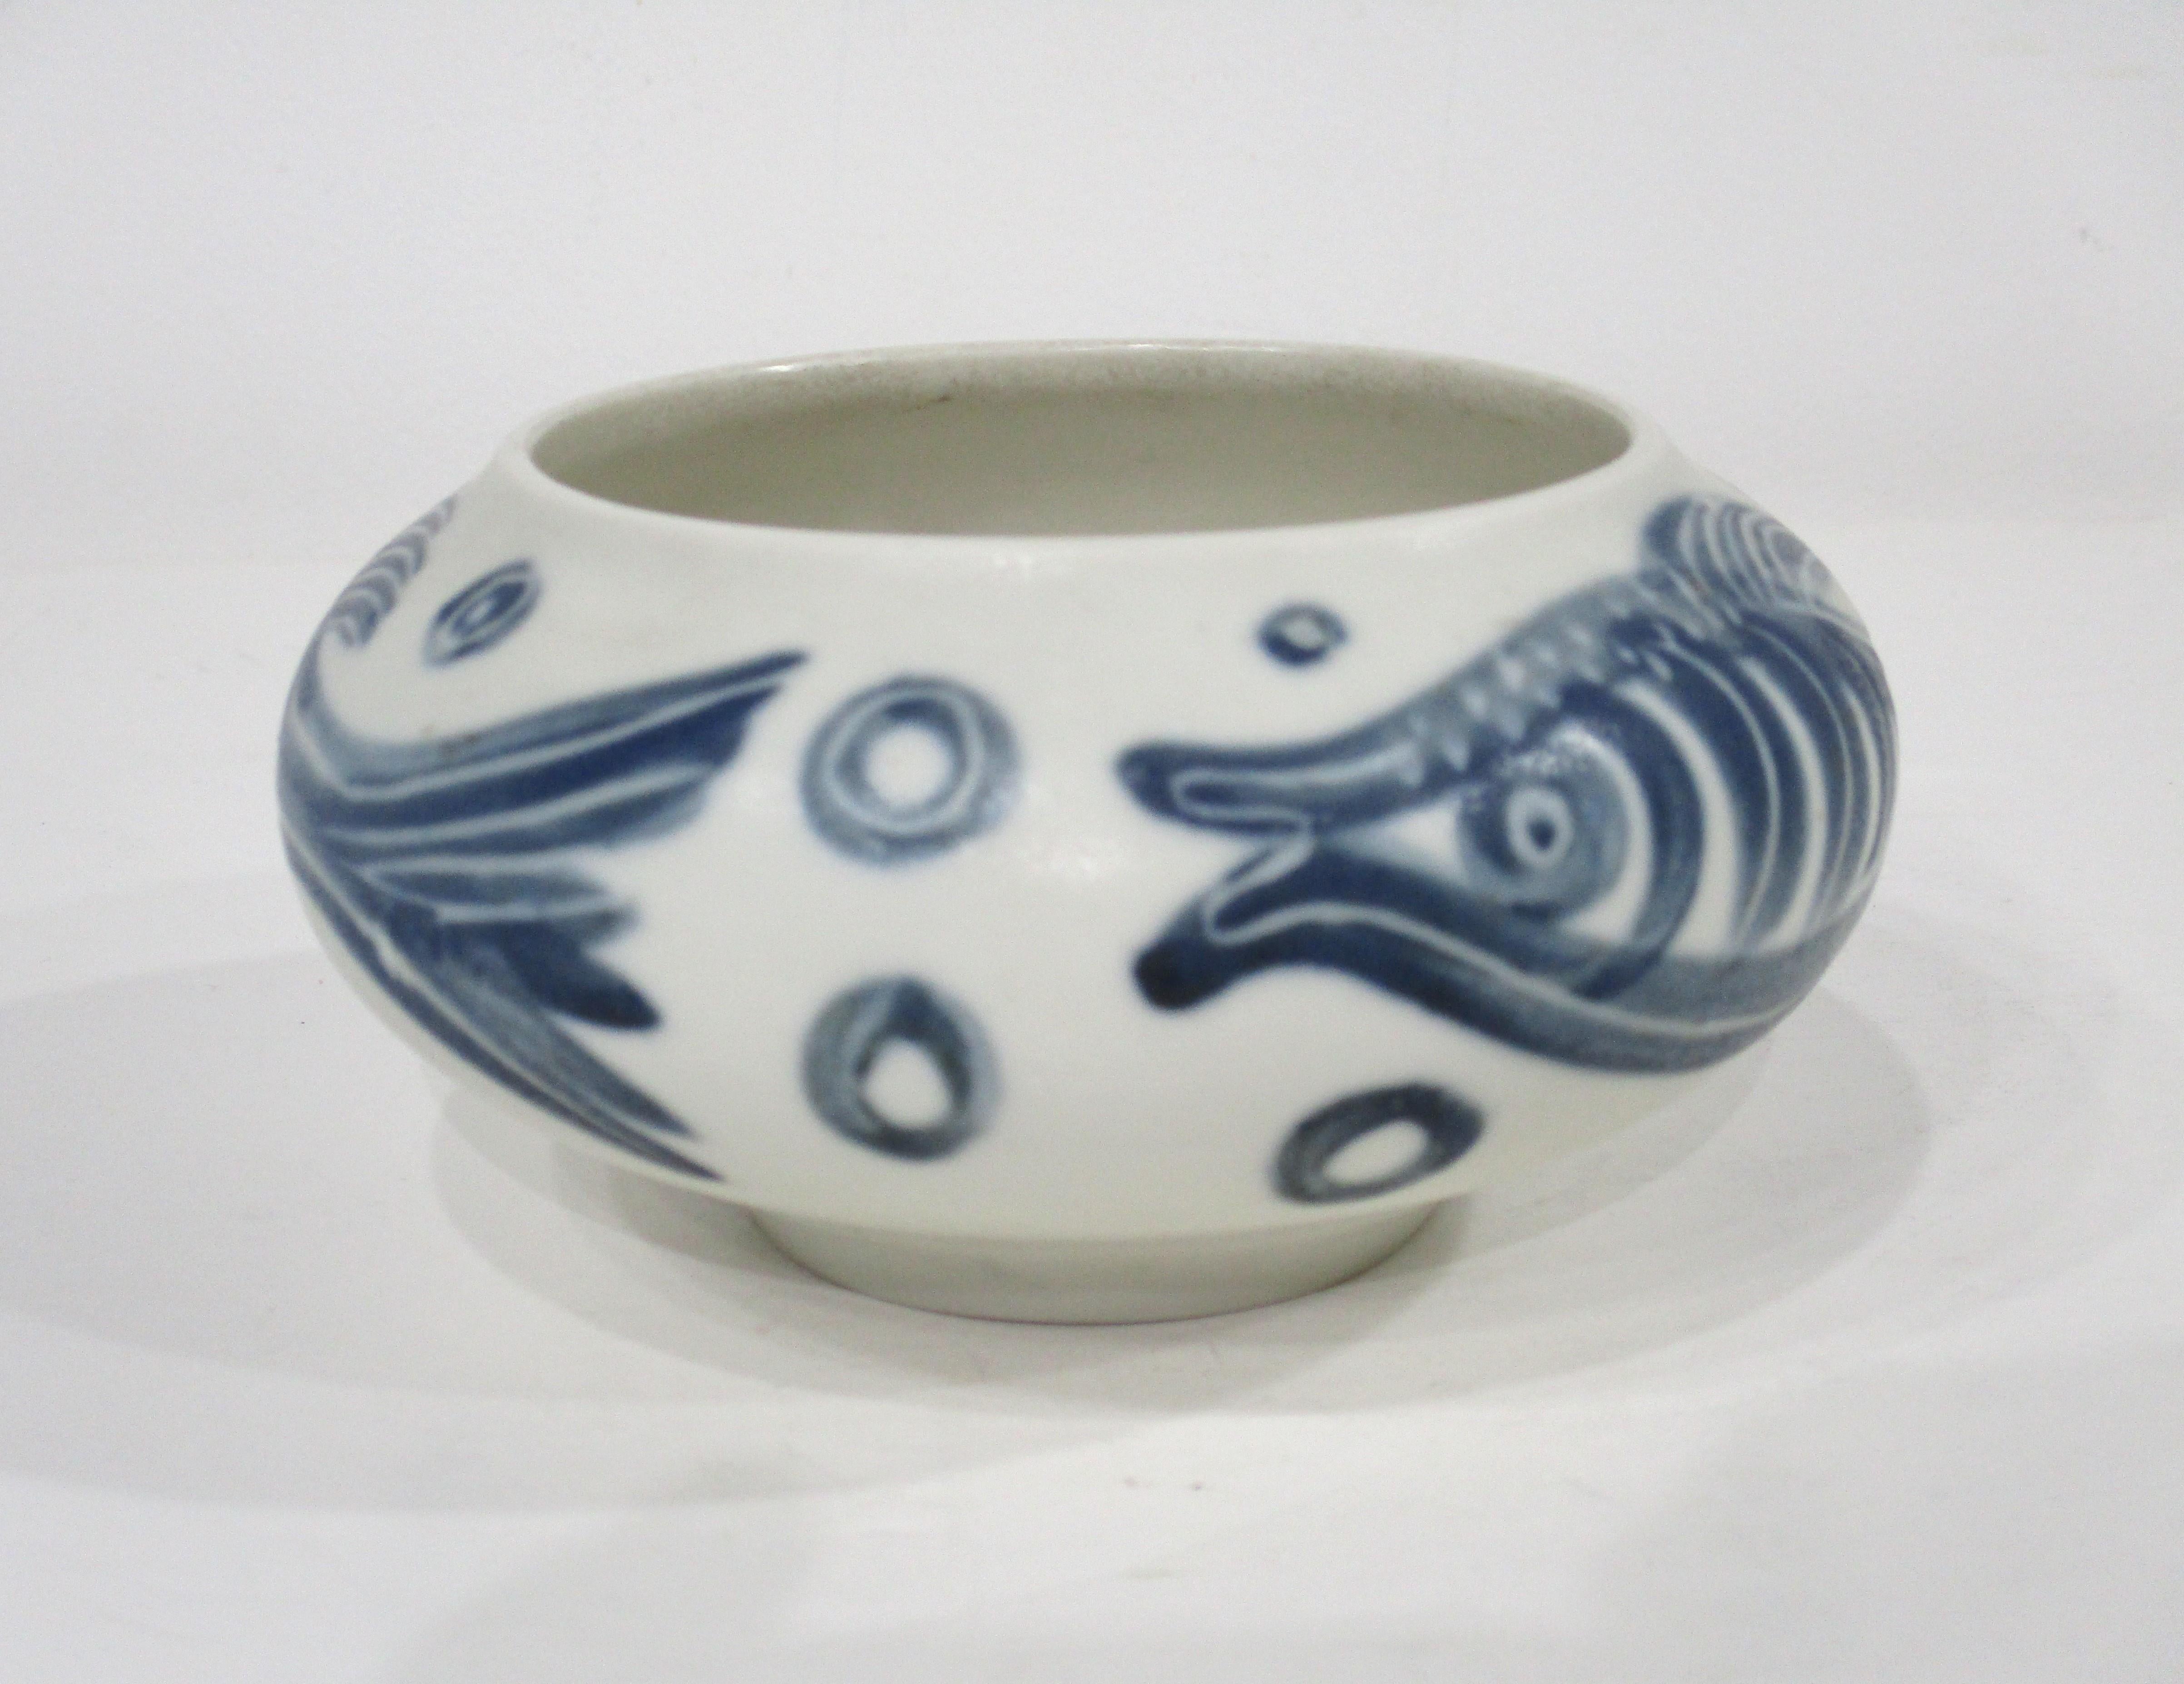 A beautifully handcrafted cream toned pottery stoneware bowl with ocean blue fish and bubble designs by artist Carl Harry Stalhane . The blue glaze on the body of the bowl gives the fish a floating and deep dreamy affect from the hand of head